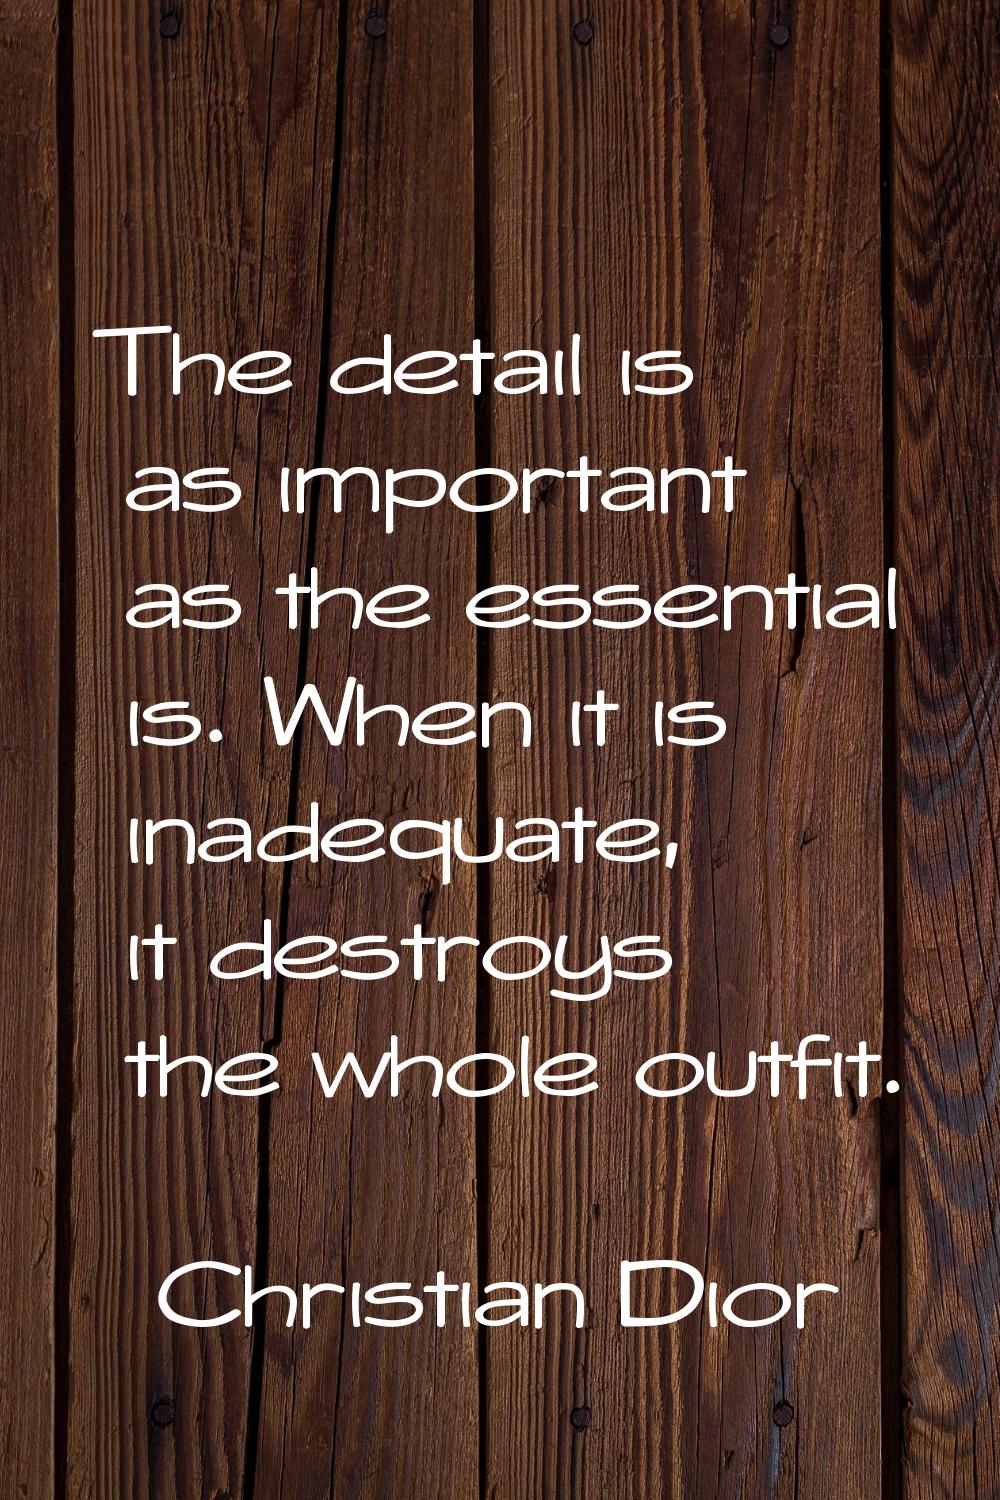 The detail is as important as the essential is. When it is inadequate, it destroys the whole outfit